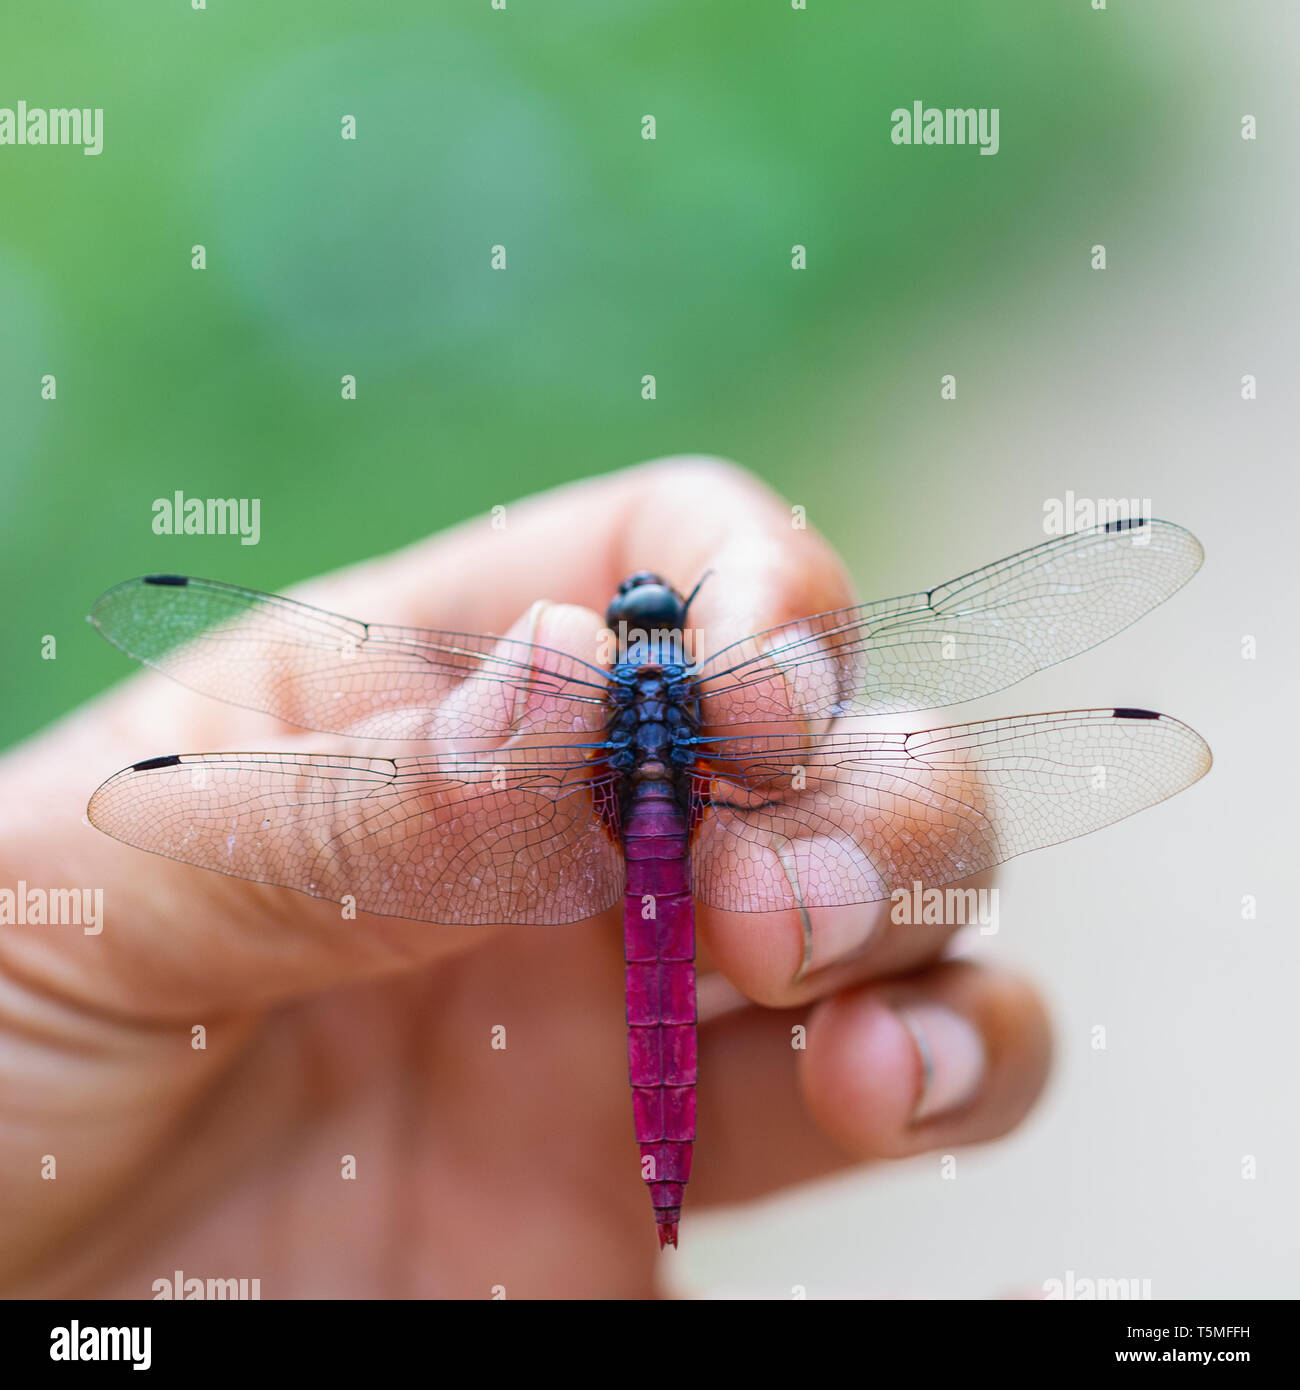 Young woman holding a colorful pink dragonfly insect, SaPa Vietnam, Asia Stock Photo